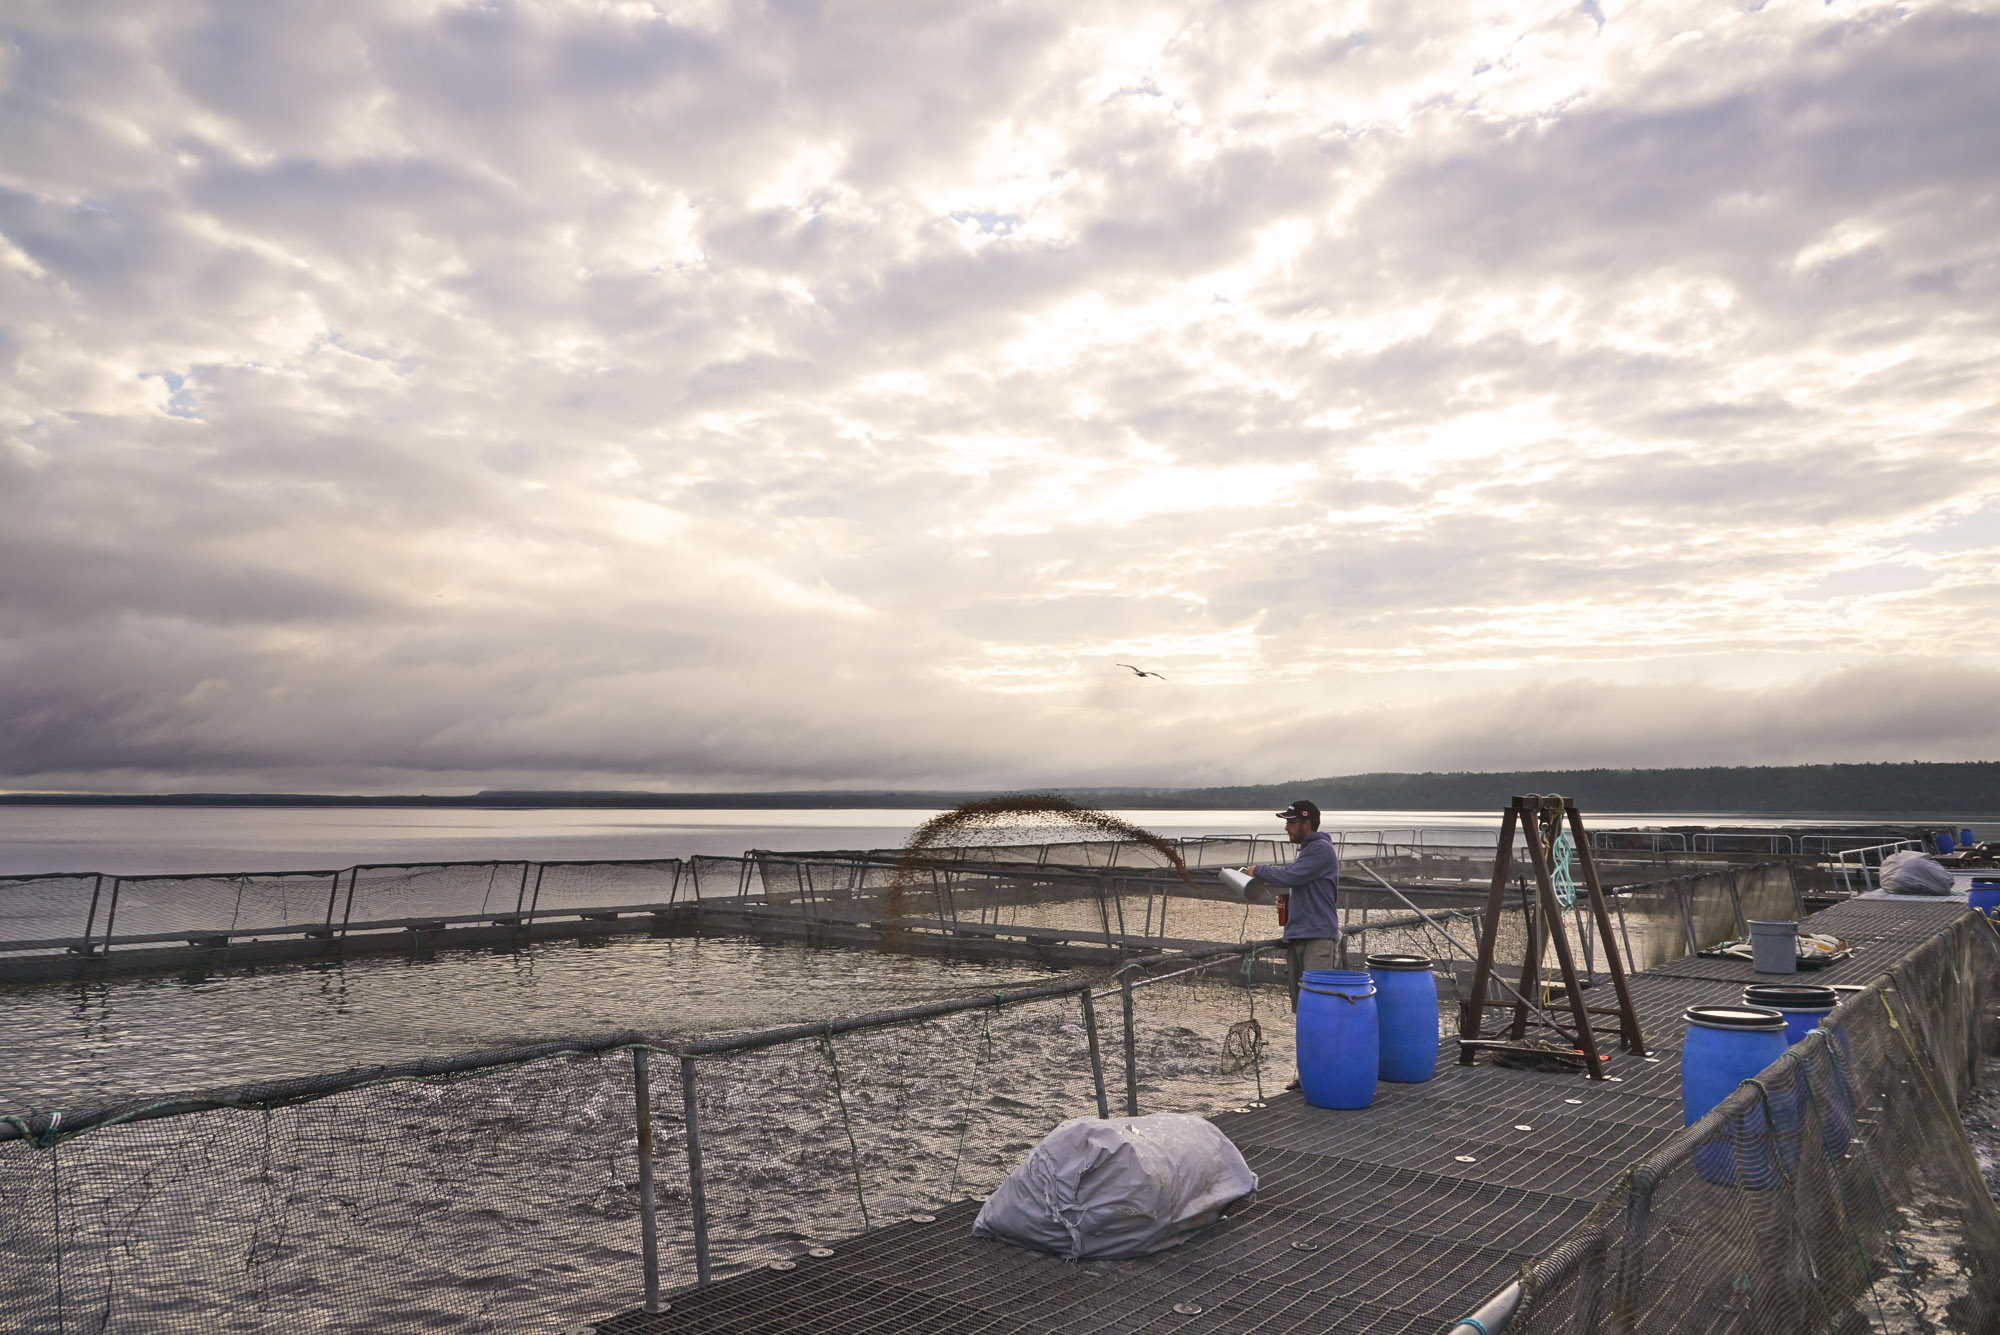 For Great Lakes aquaculture, it's a tale of two countries